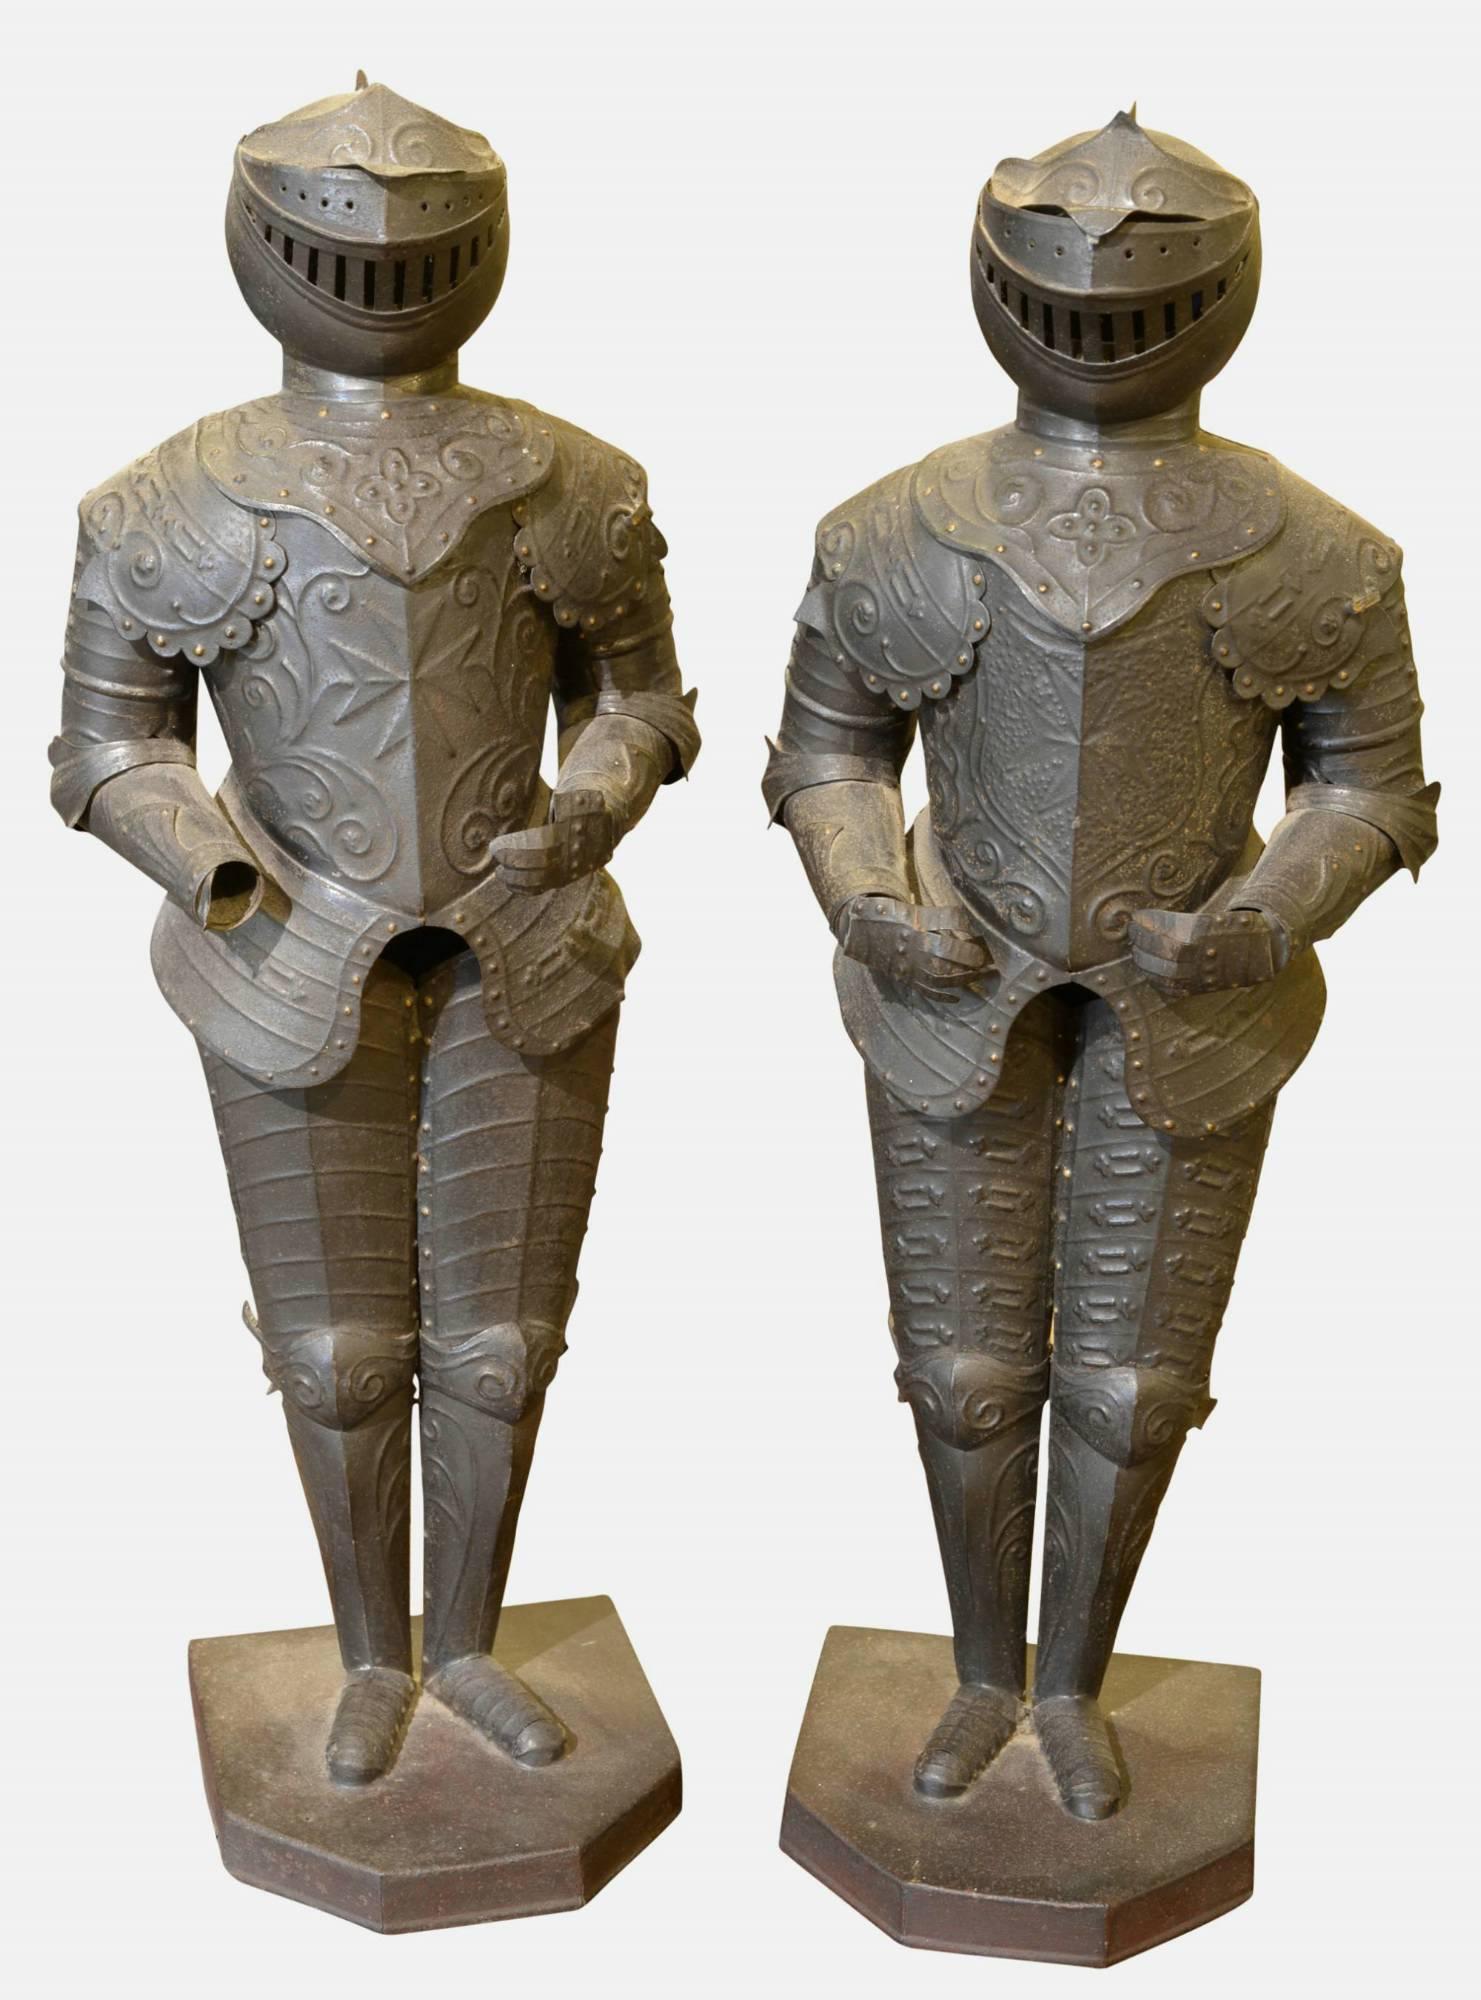 A pair of miniature suits of armour in 16th century style.

Early 20th century.